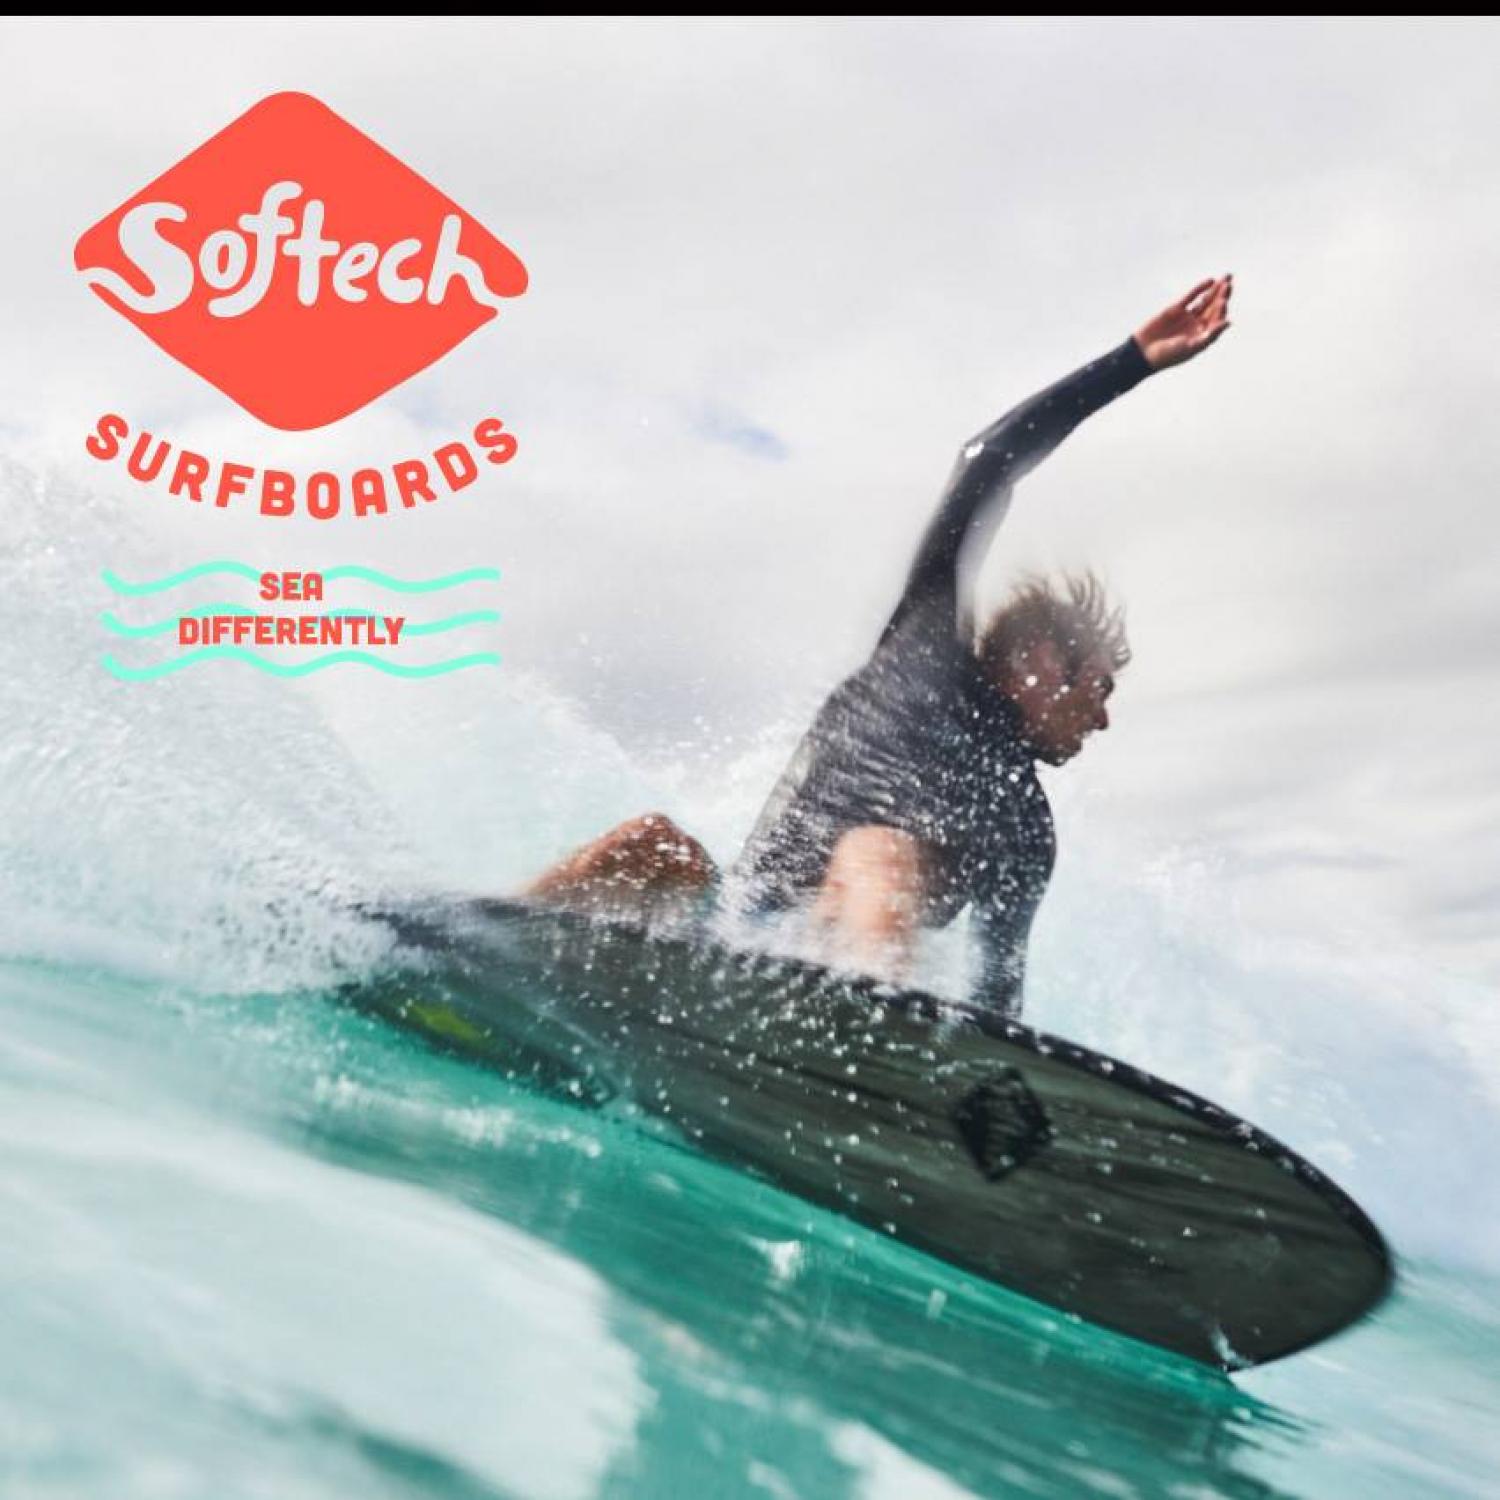 Arrival planned news of Softech Surfboards